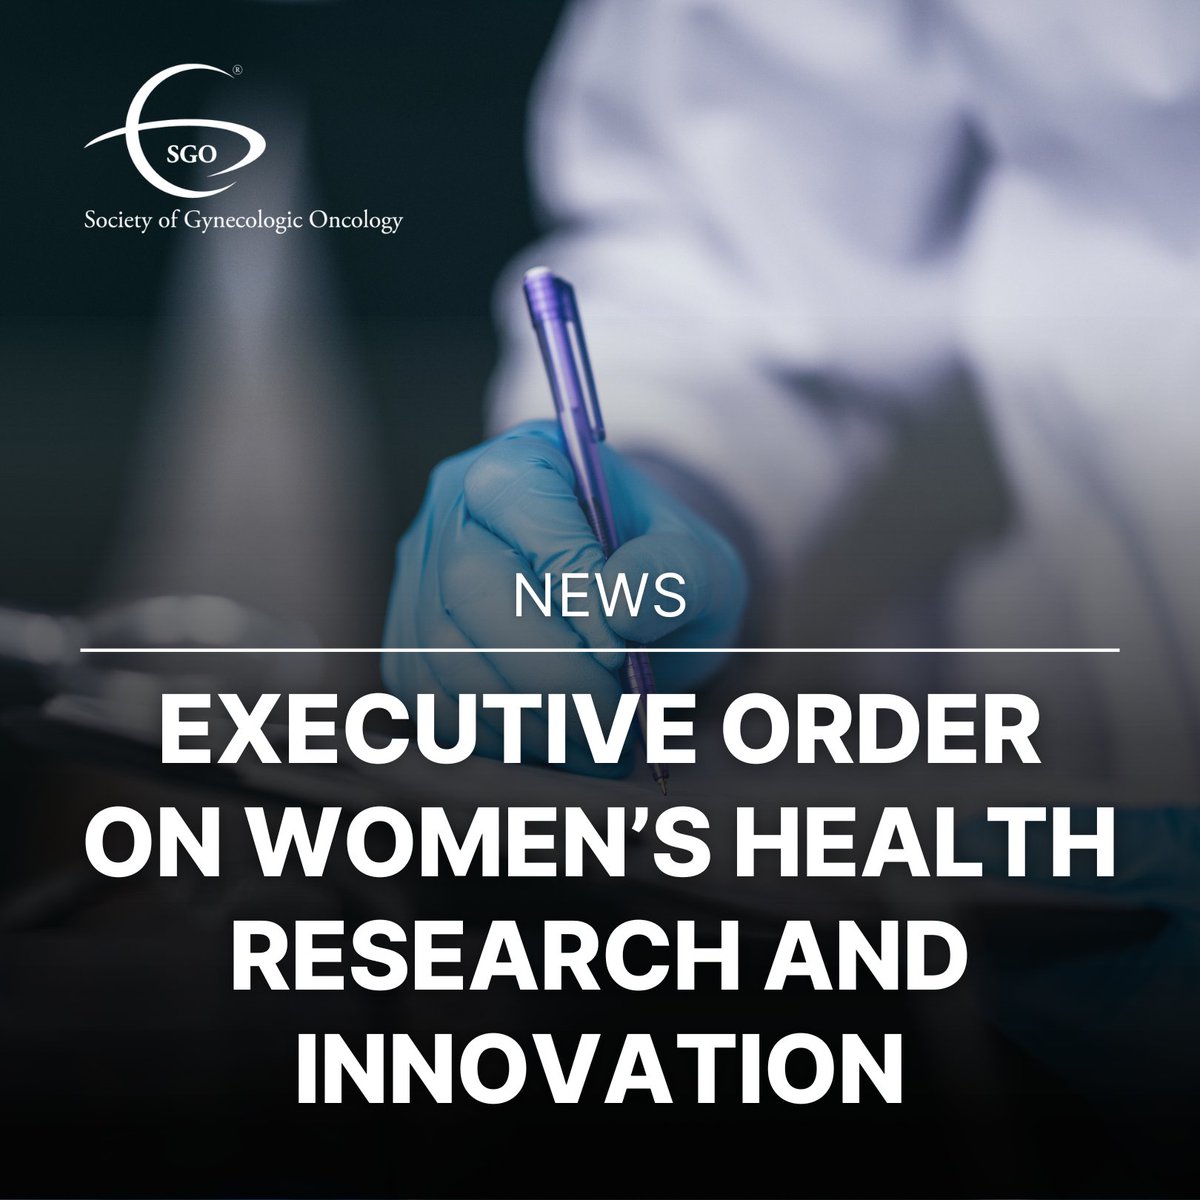 On March 18, the Biden Administration issued an Executive Order on Advancing Women’s Health Research and Innovation. The order addresses historical disparities in biomedical research and establishes an initiative to accelerate research efforts. Learn More bit.ly/3J02MBc